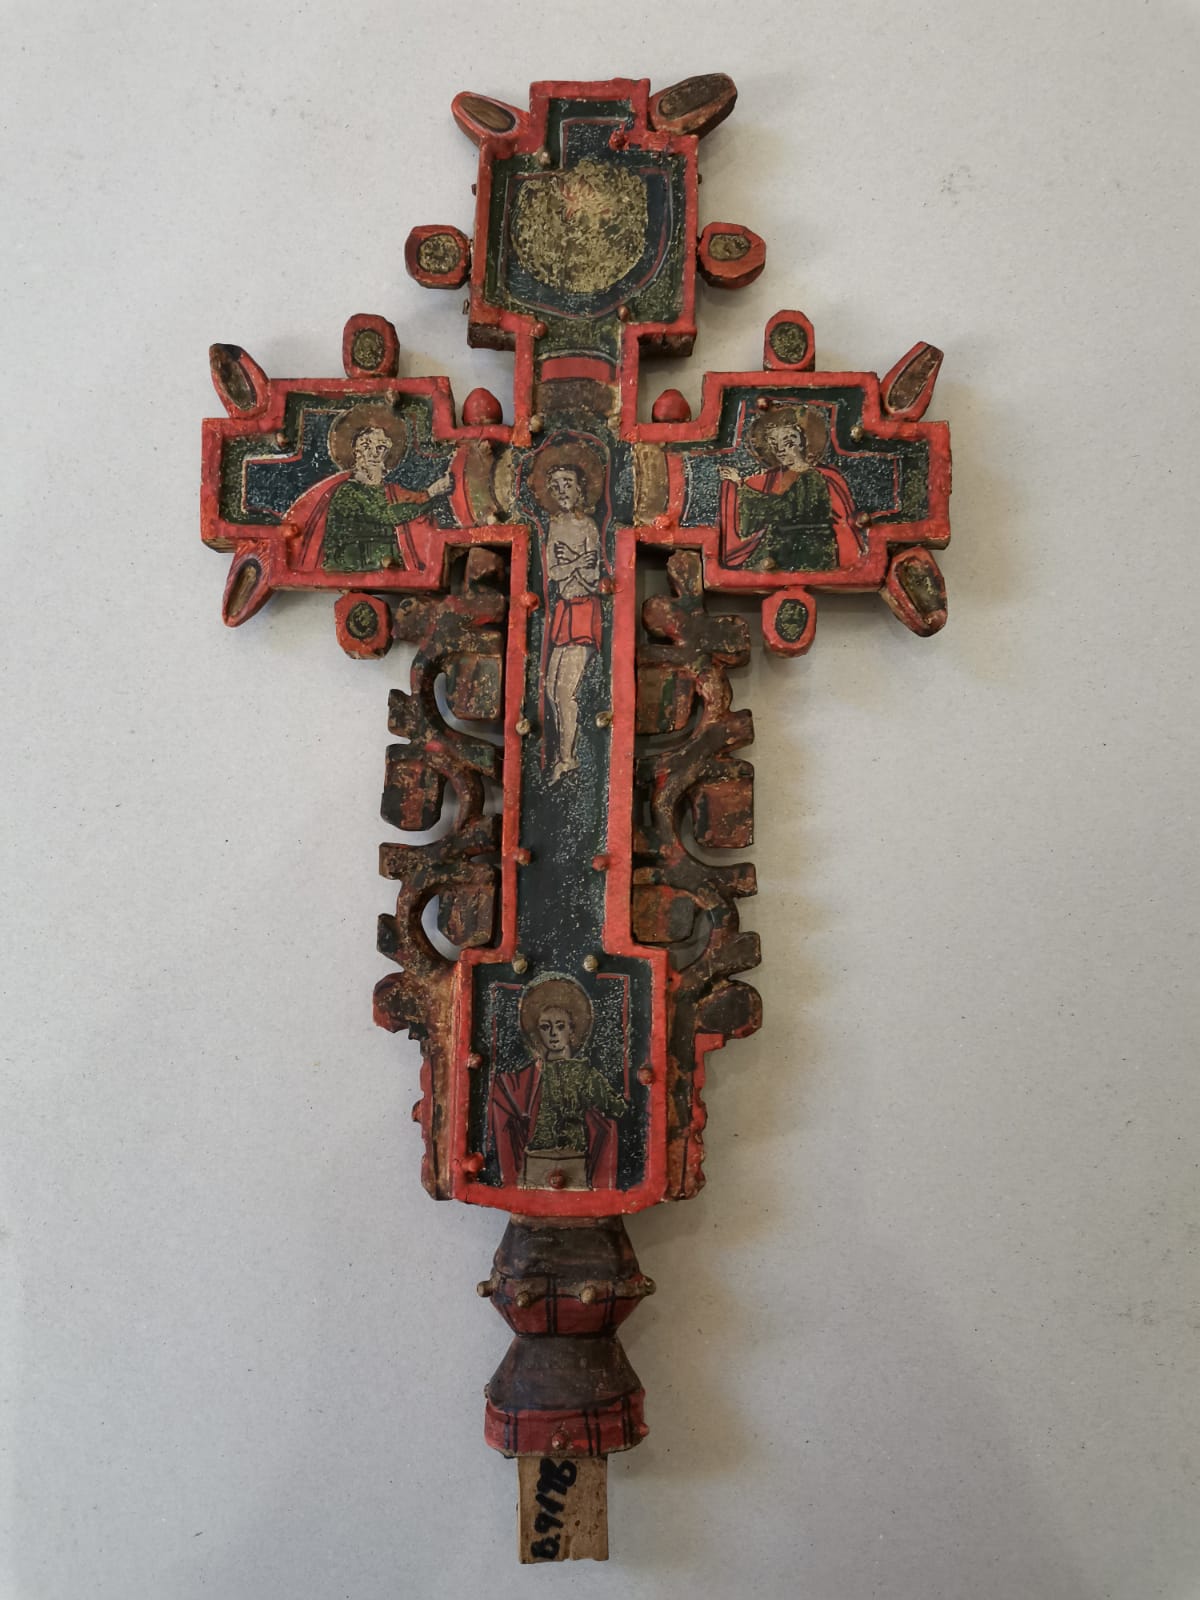 Artefacts restored within the project: painted wooden cross